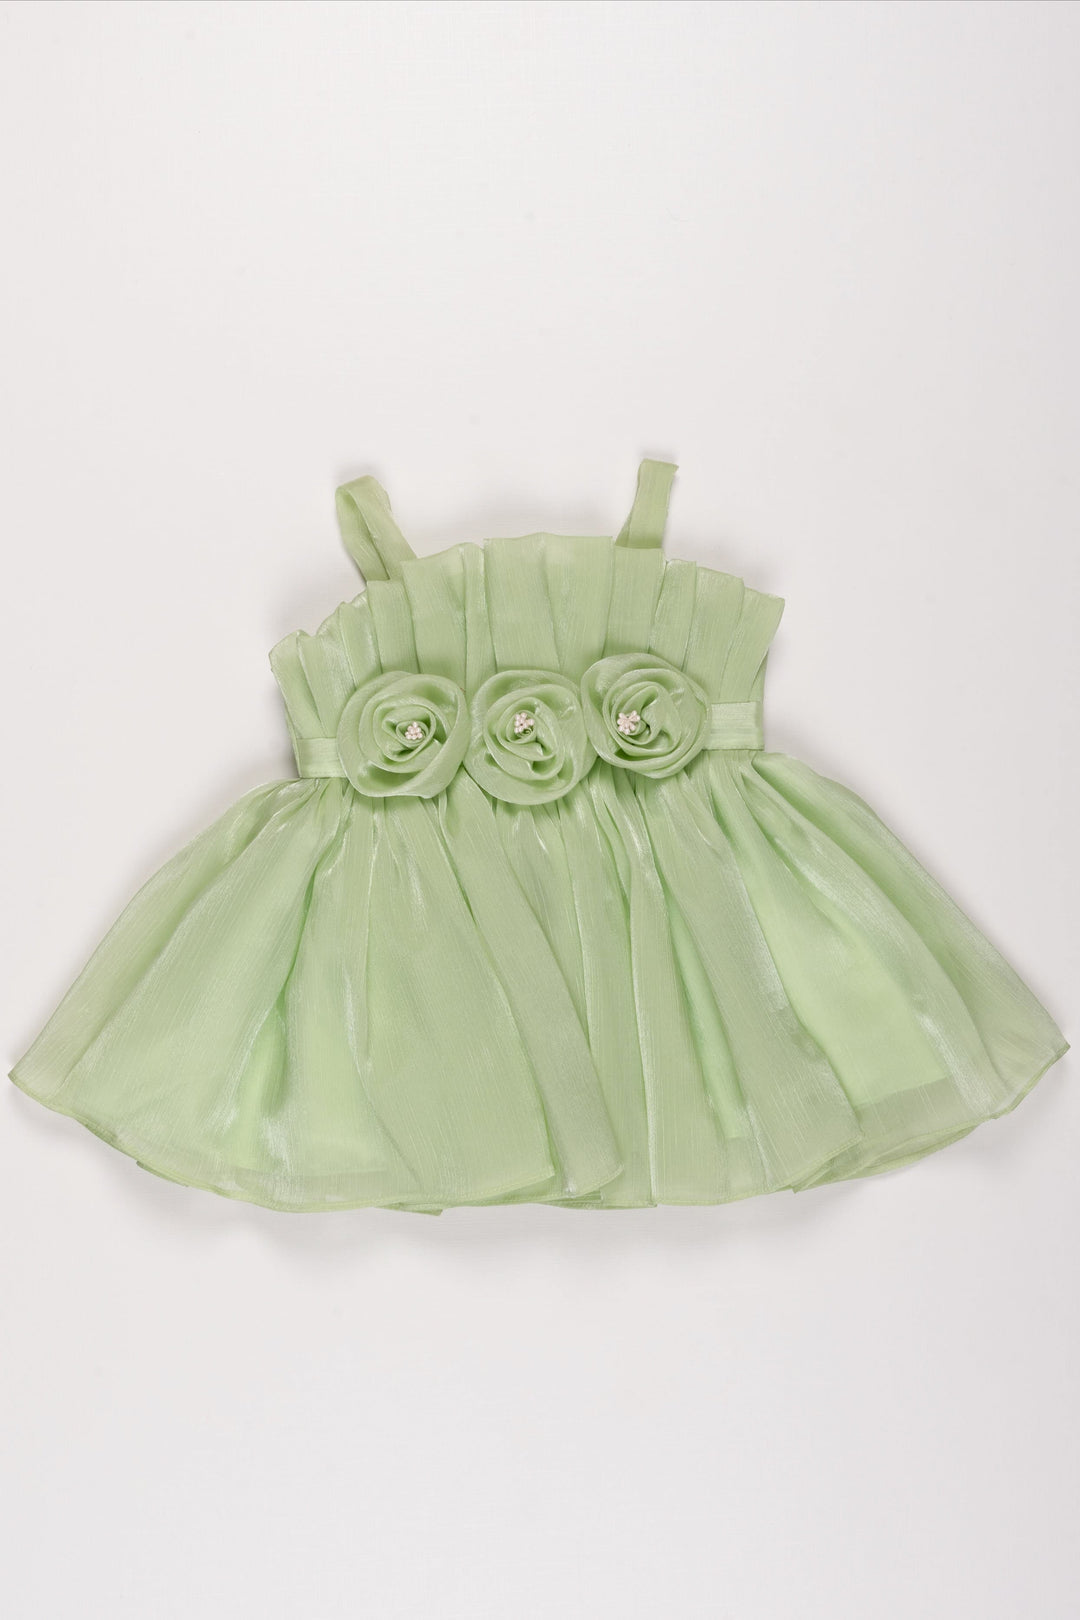 The Nesavu Girls Fancy Party Frock Spring Green Organza Party Frock with Floral Accents for Girls Nesavu 12 (3M) / Green / Organza PF173A-12 Girls Green Floral Organza Dress | Spring Party Frock with Handcrafted Roses | The Nesavu